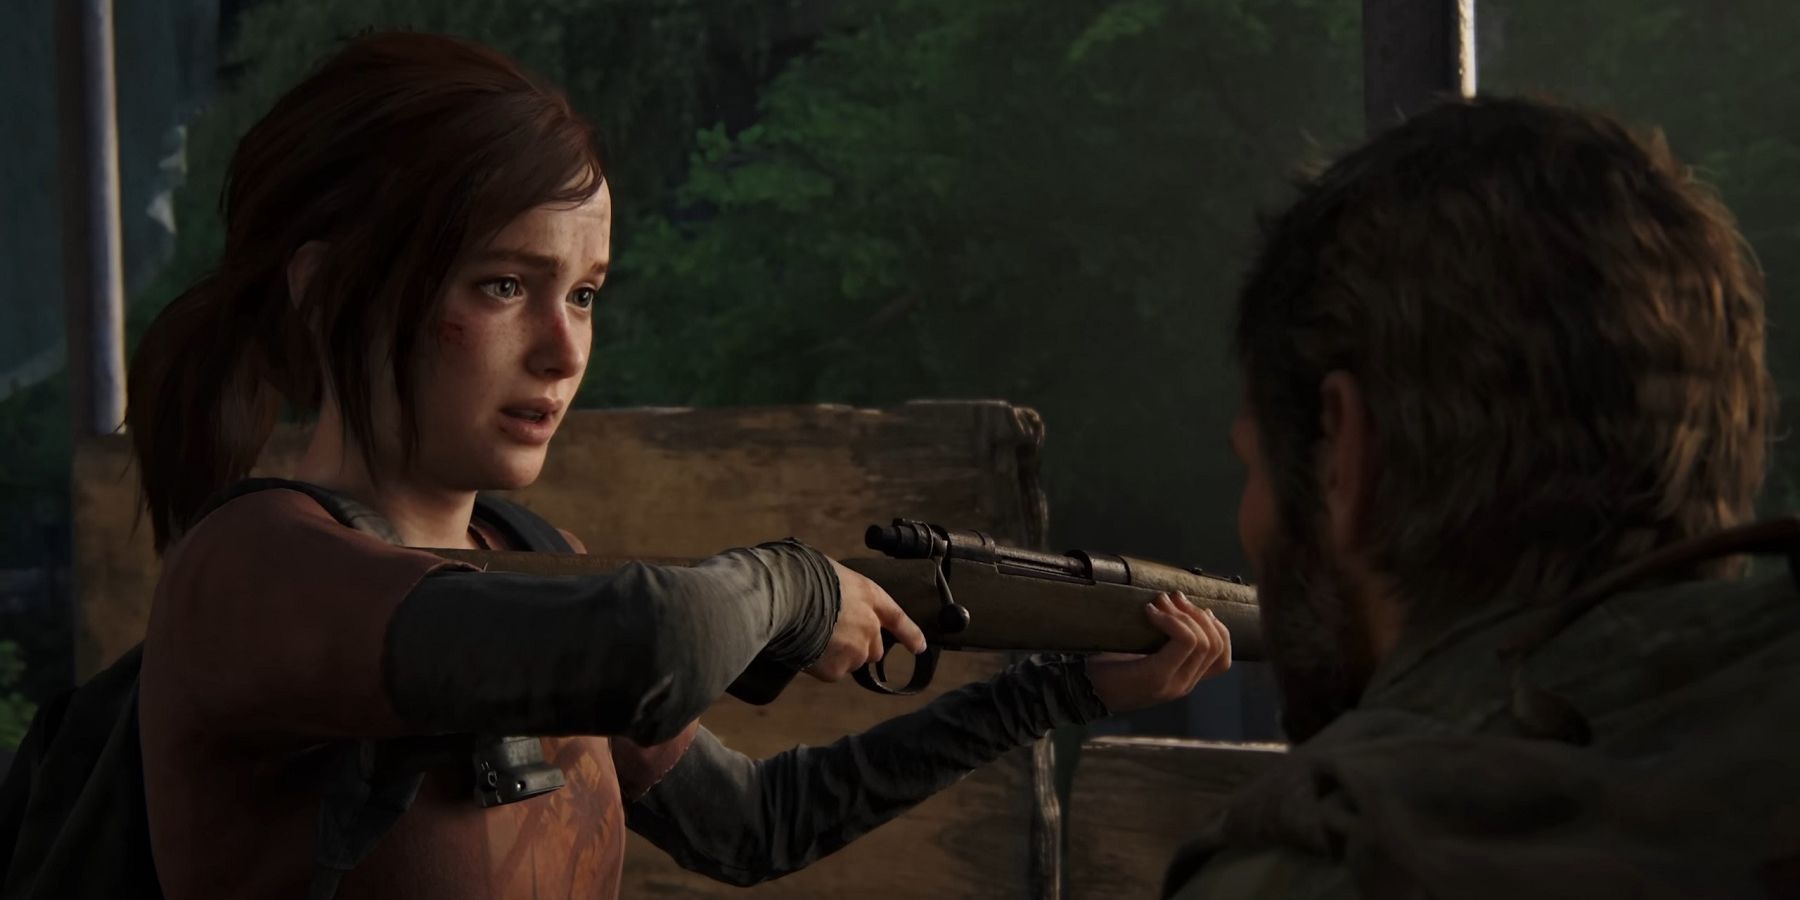 Should You Play The Last Of Us Remastered Or TLOU Part 1